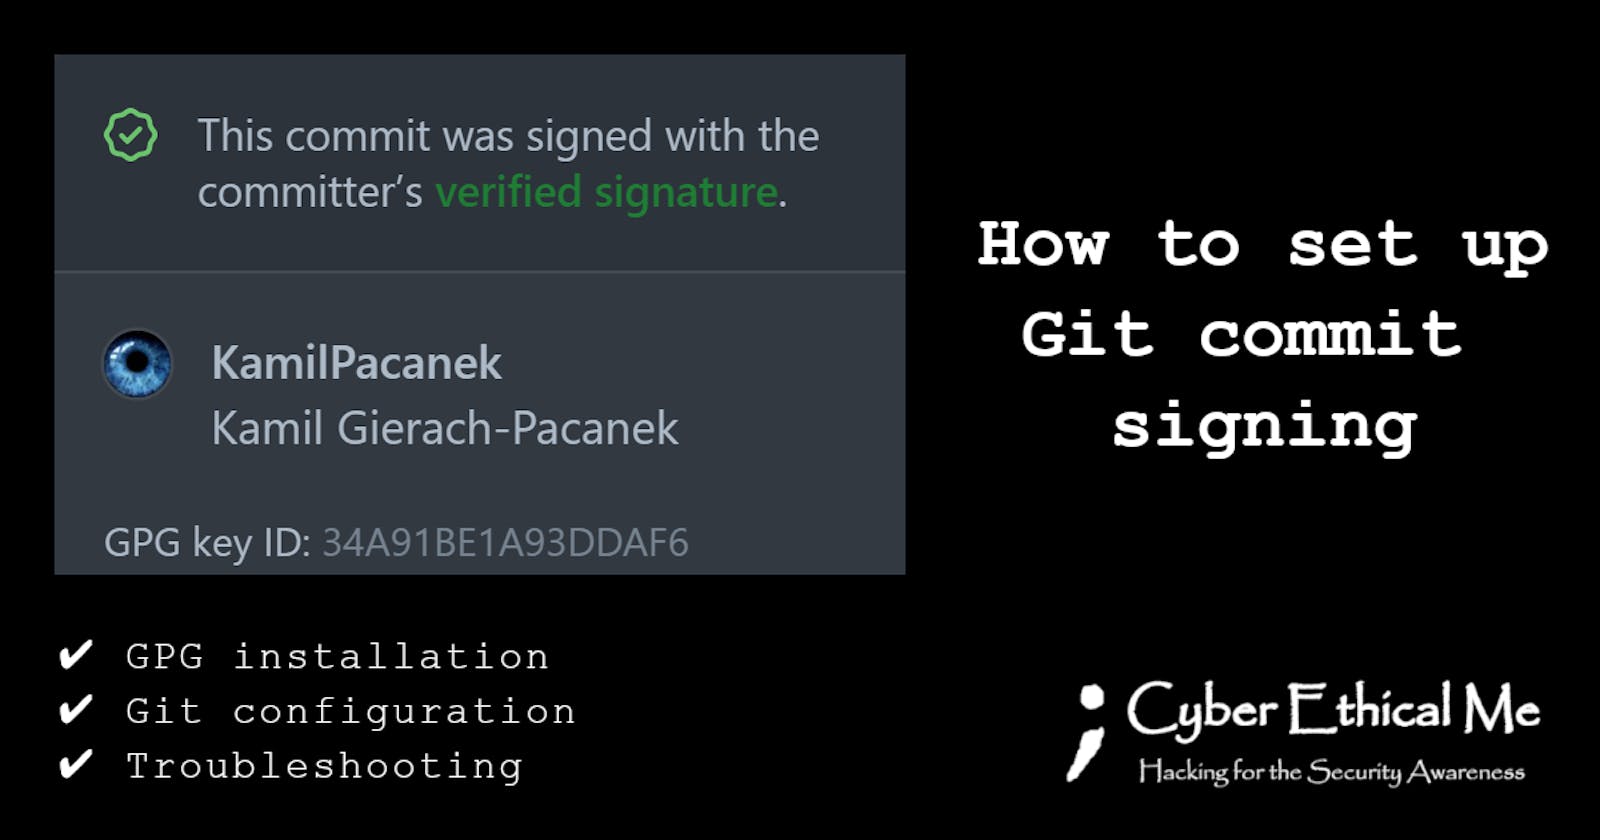 How to set up Git commit signing